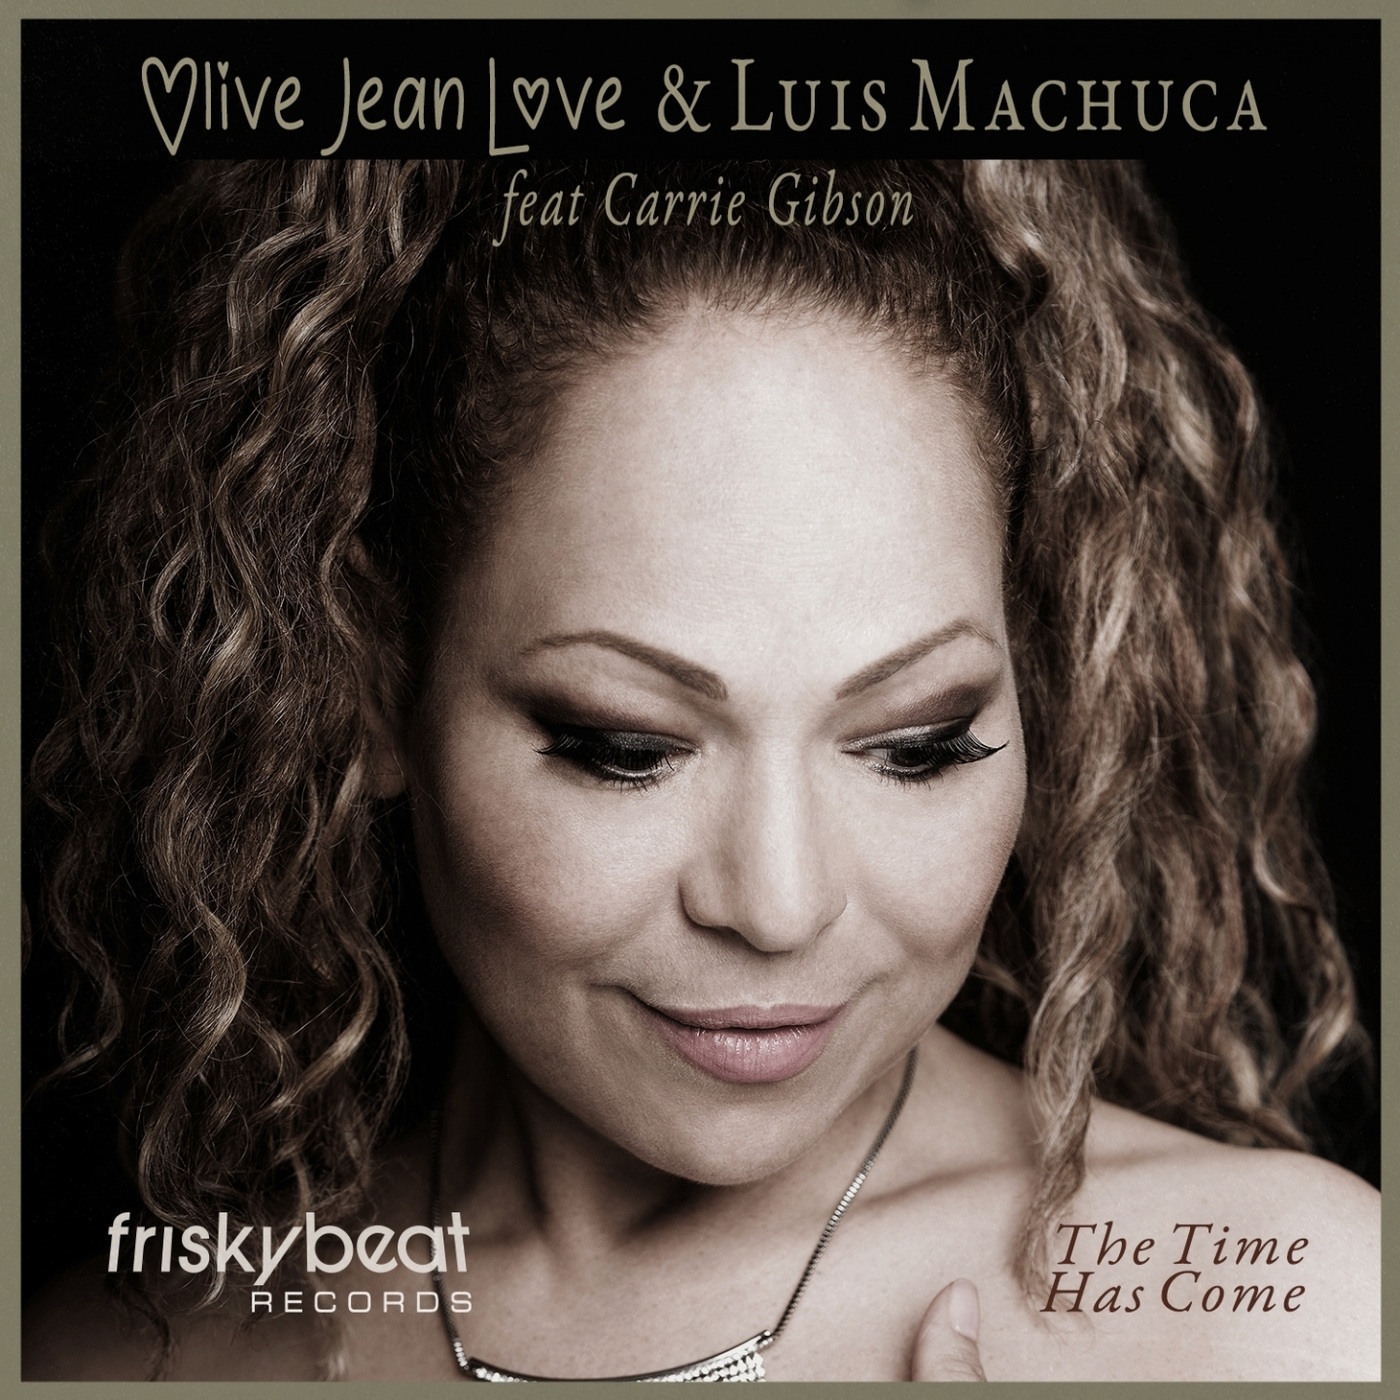 Olive Jean Love & Luis Machuca ft Carrie Gibson - The Time Has Come / Friskybeat Records